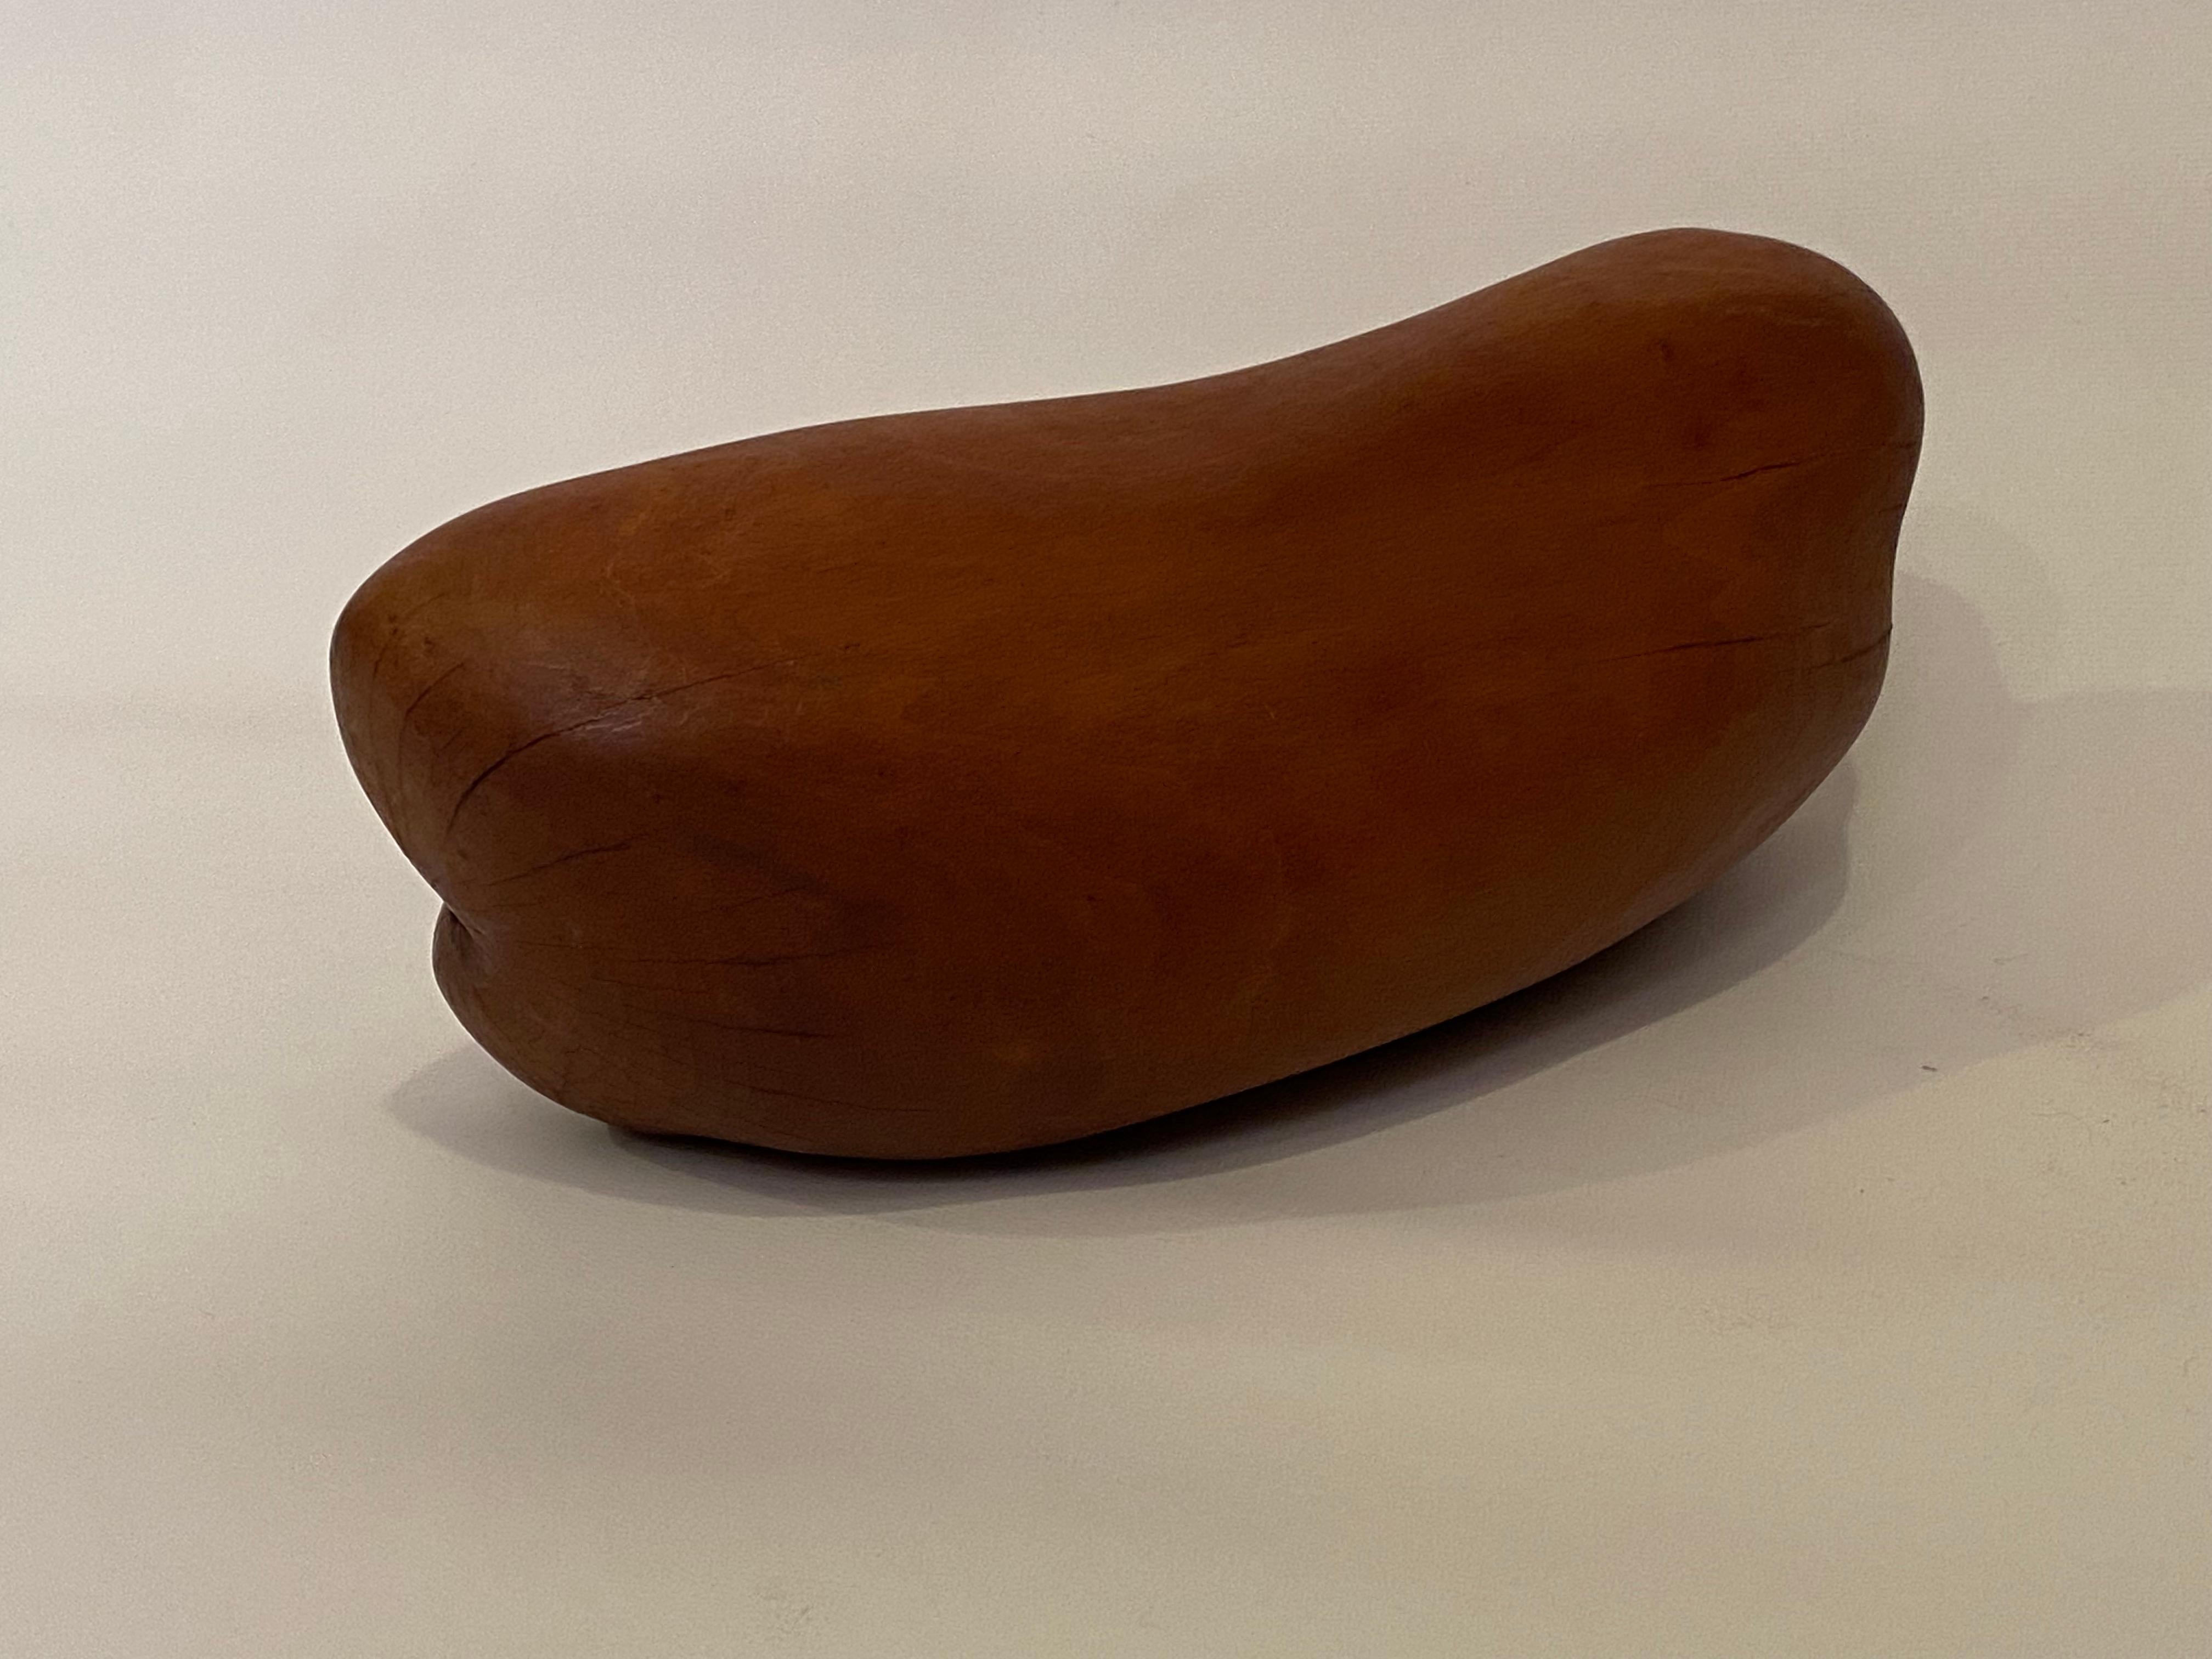 Hand-Carved 1973 Organic Abstract Wood Sculpture, Manner of Barbara Hepworth For Sale